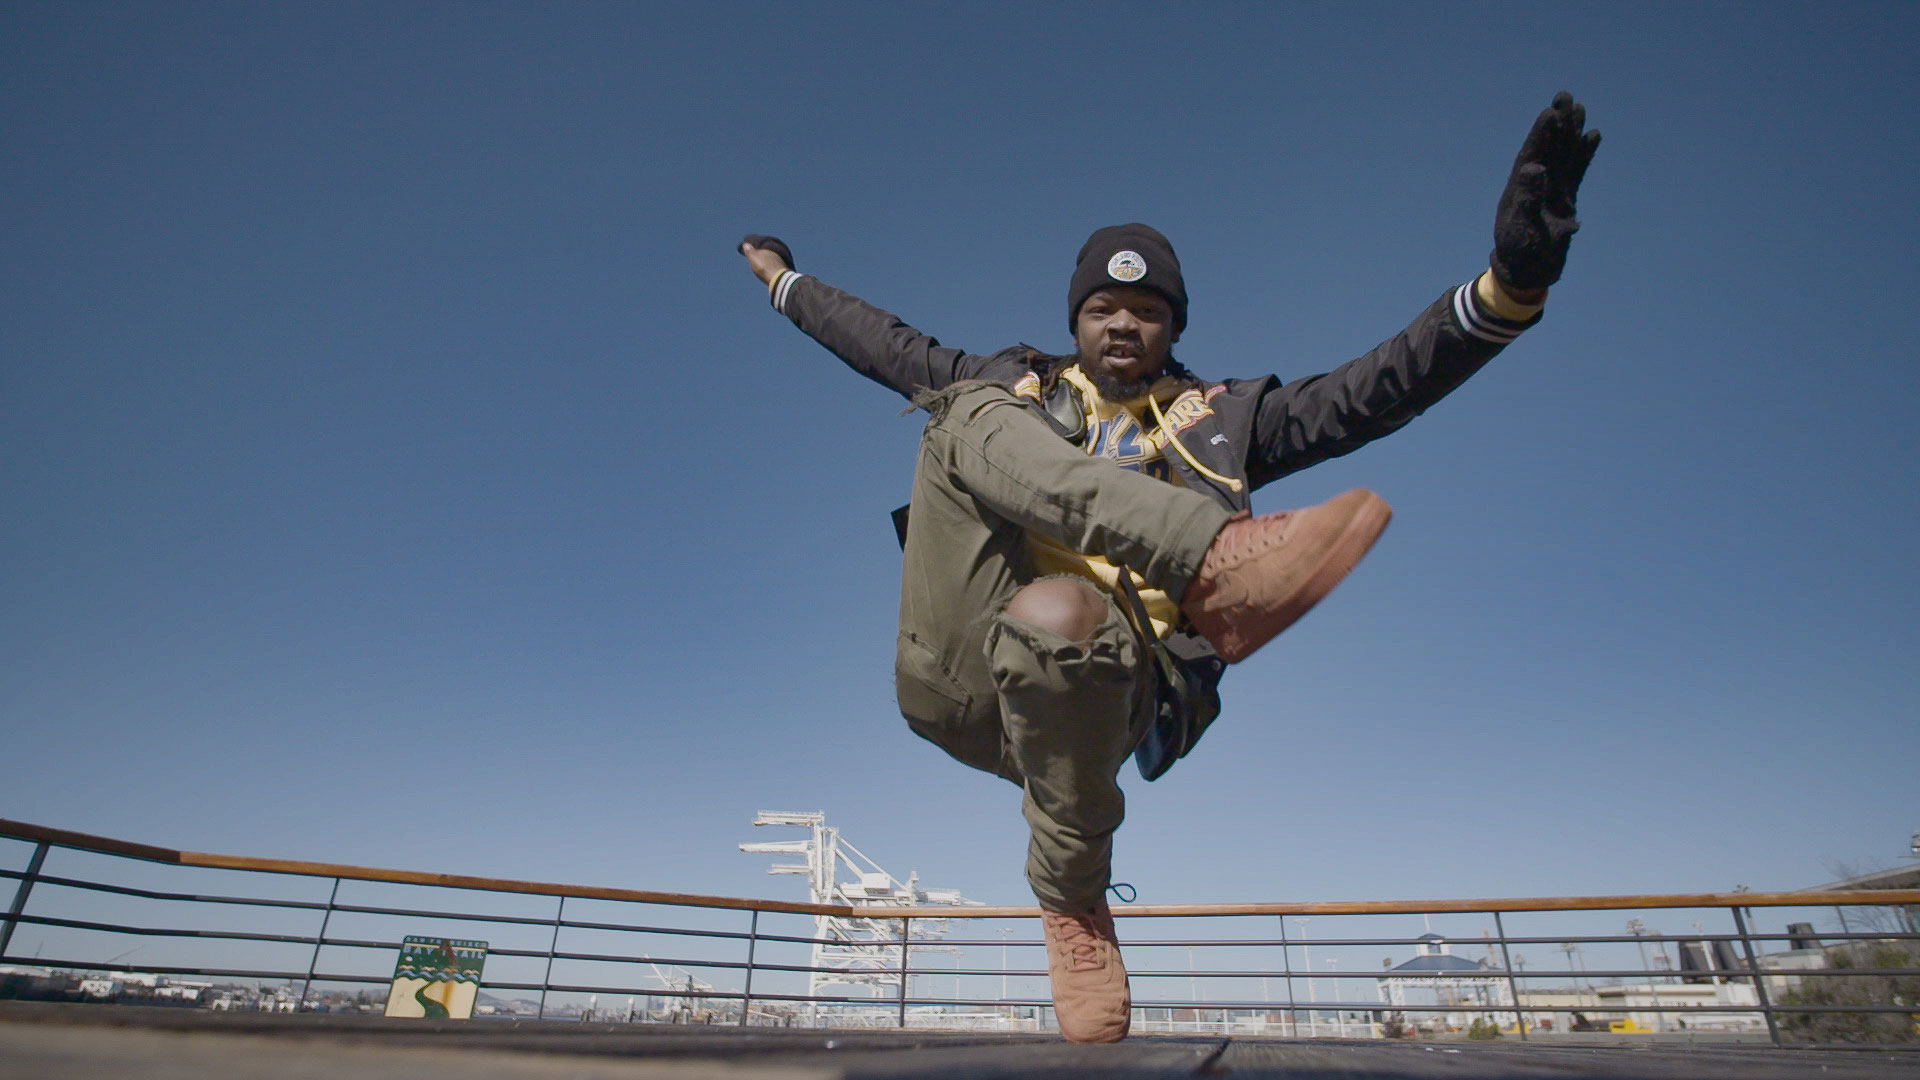 Garion Morgan, a.k.a. Icecold 3000 of the Turf Fienz, dancing near the Port of Oakland in 2019.